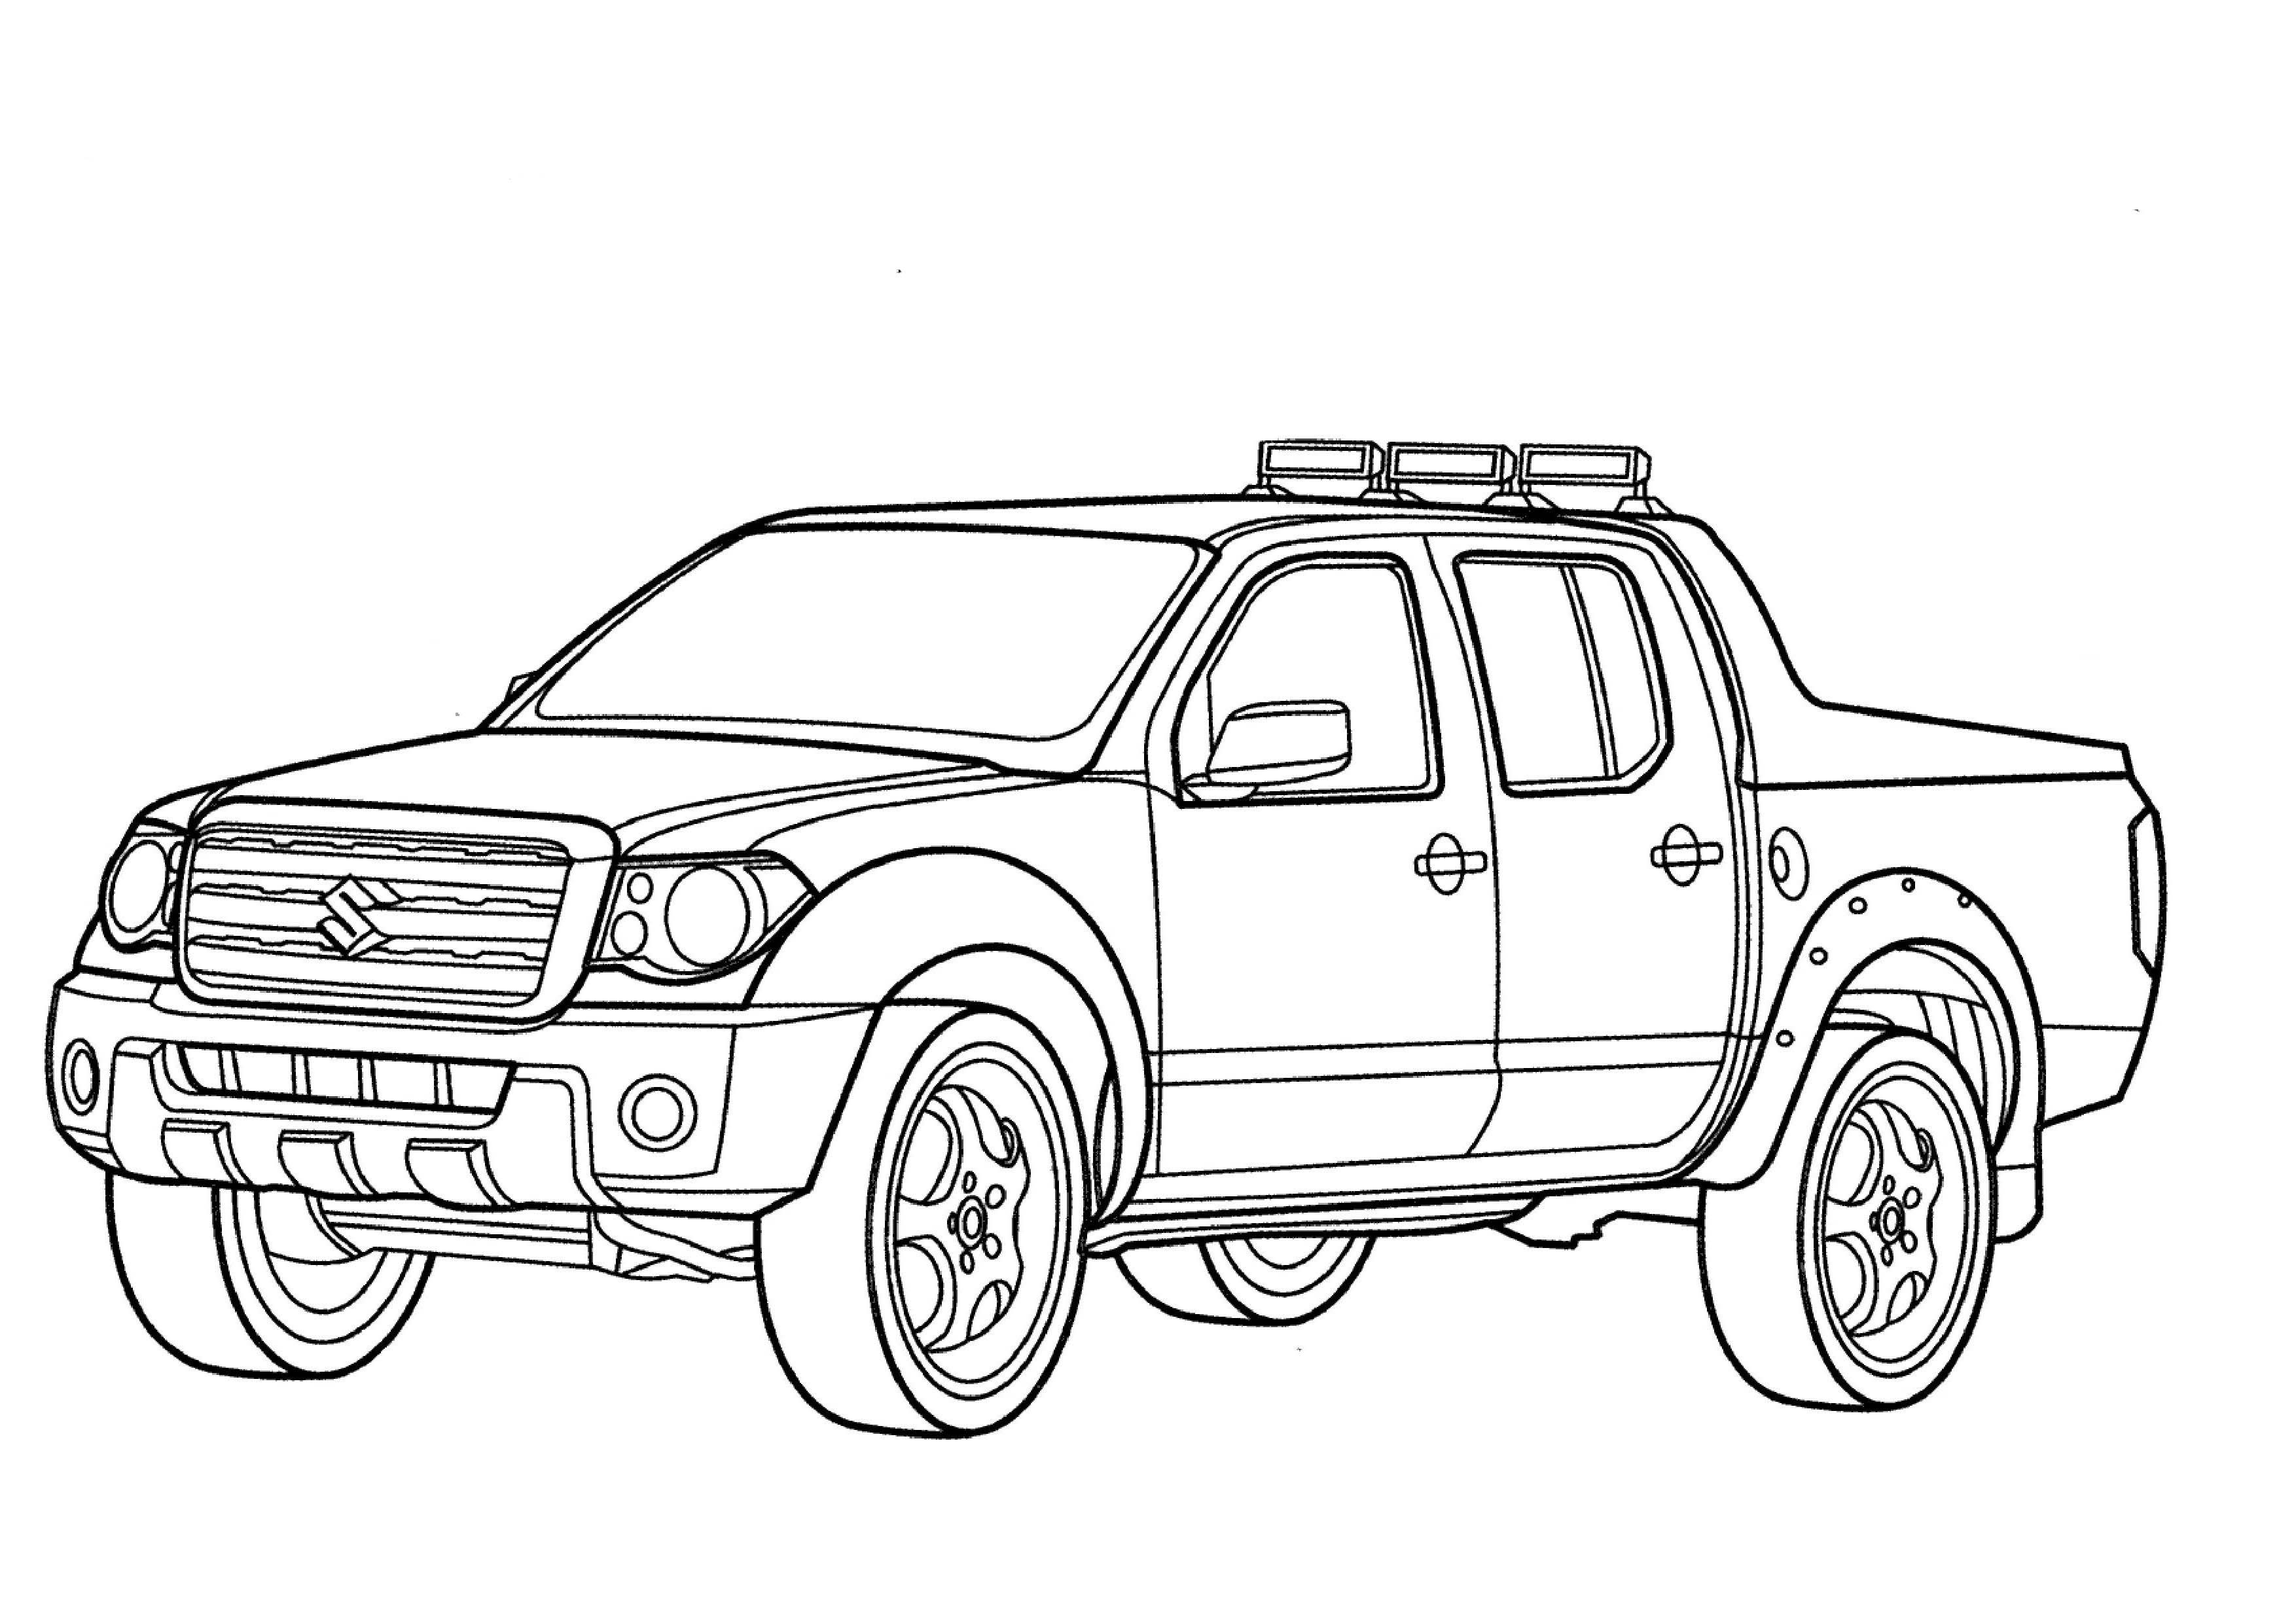 Gmc Truck Coloring Pages at GetDrawings.com | Free for ...